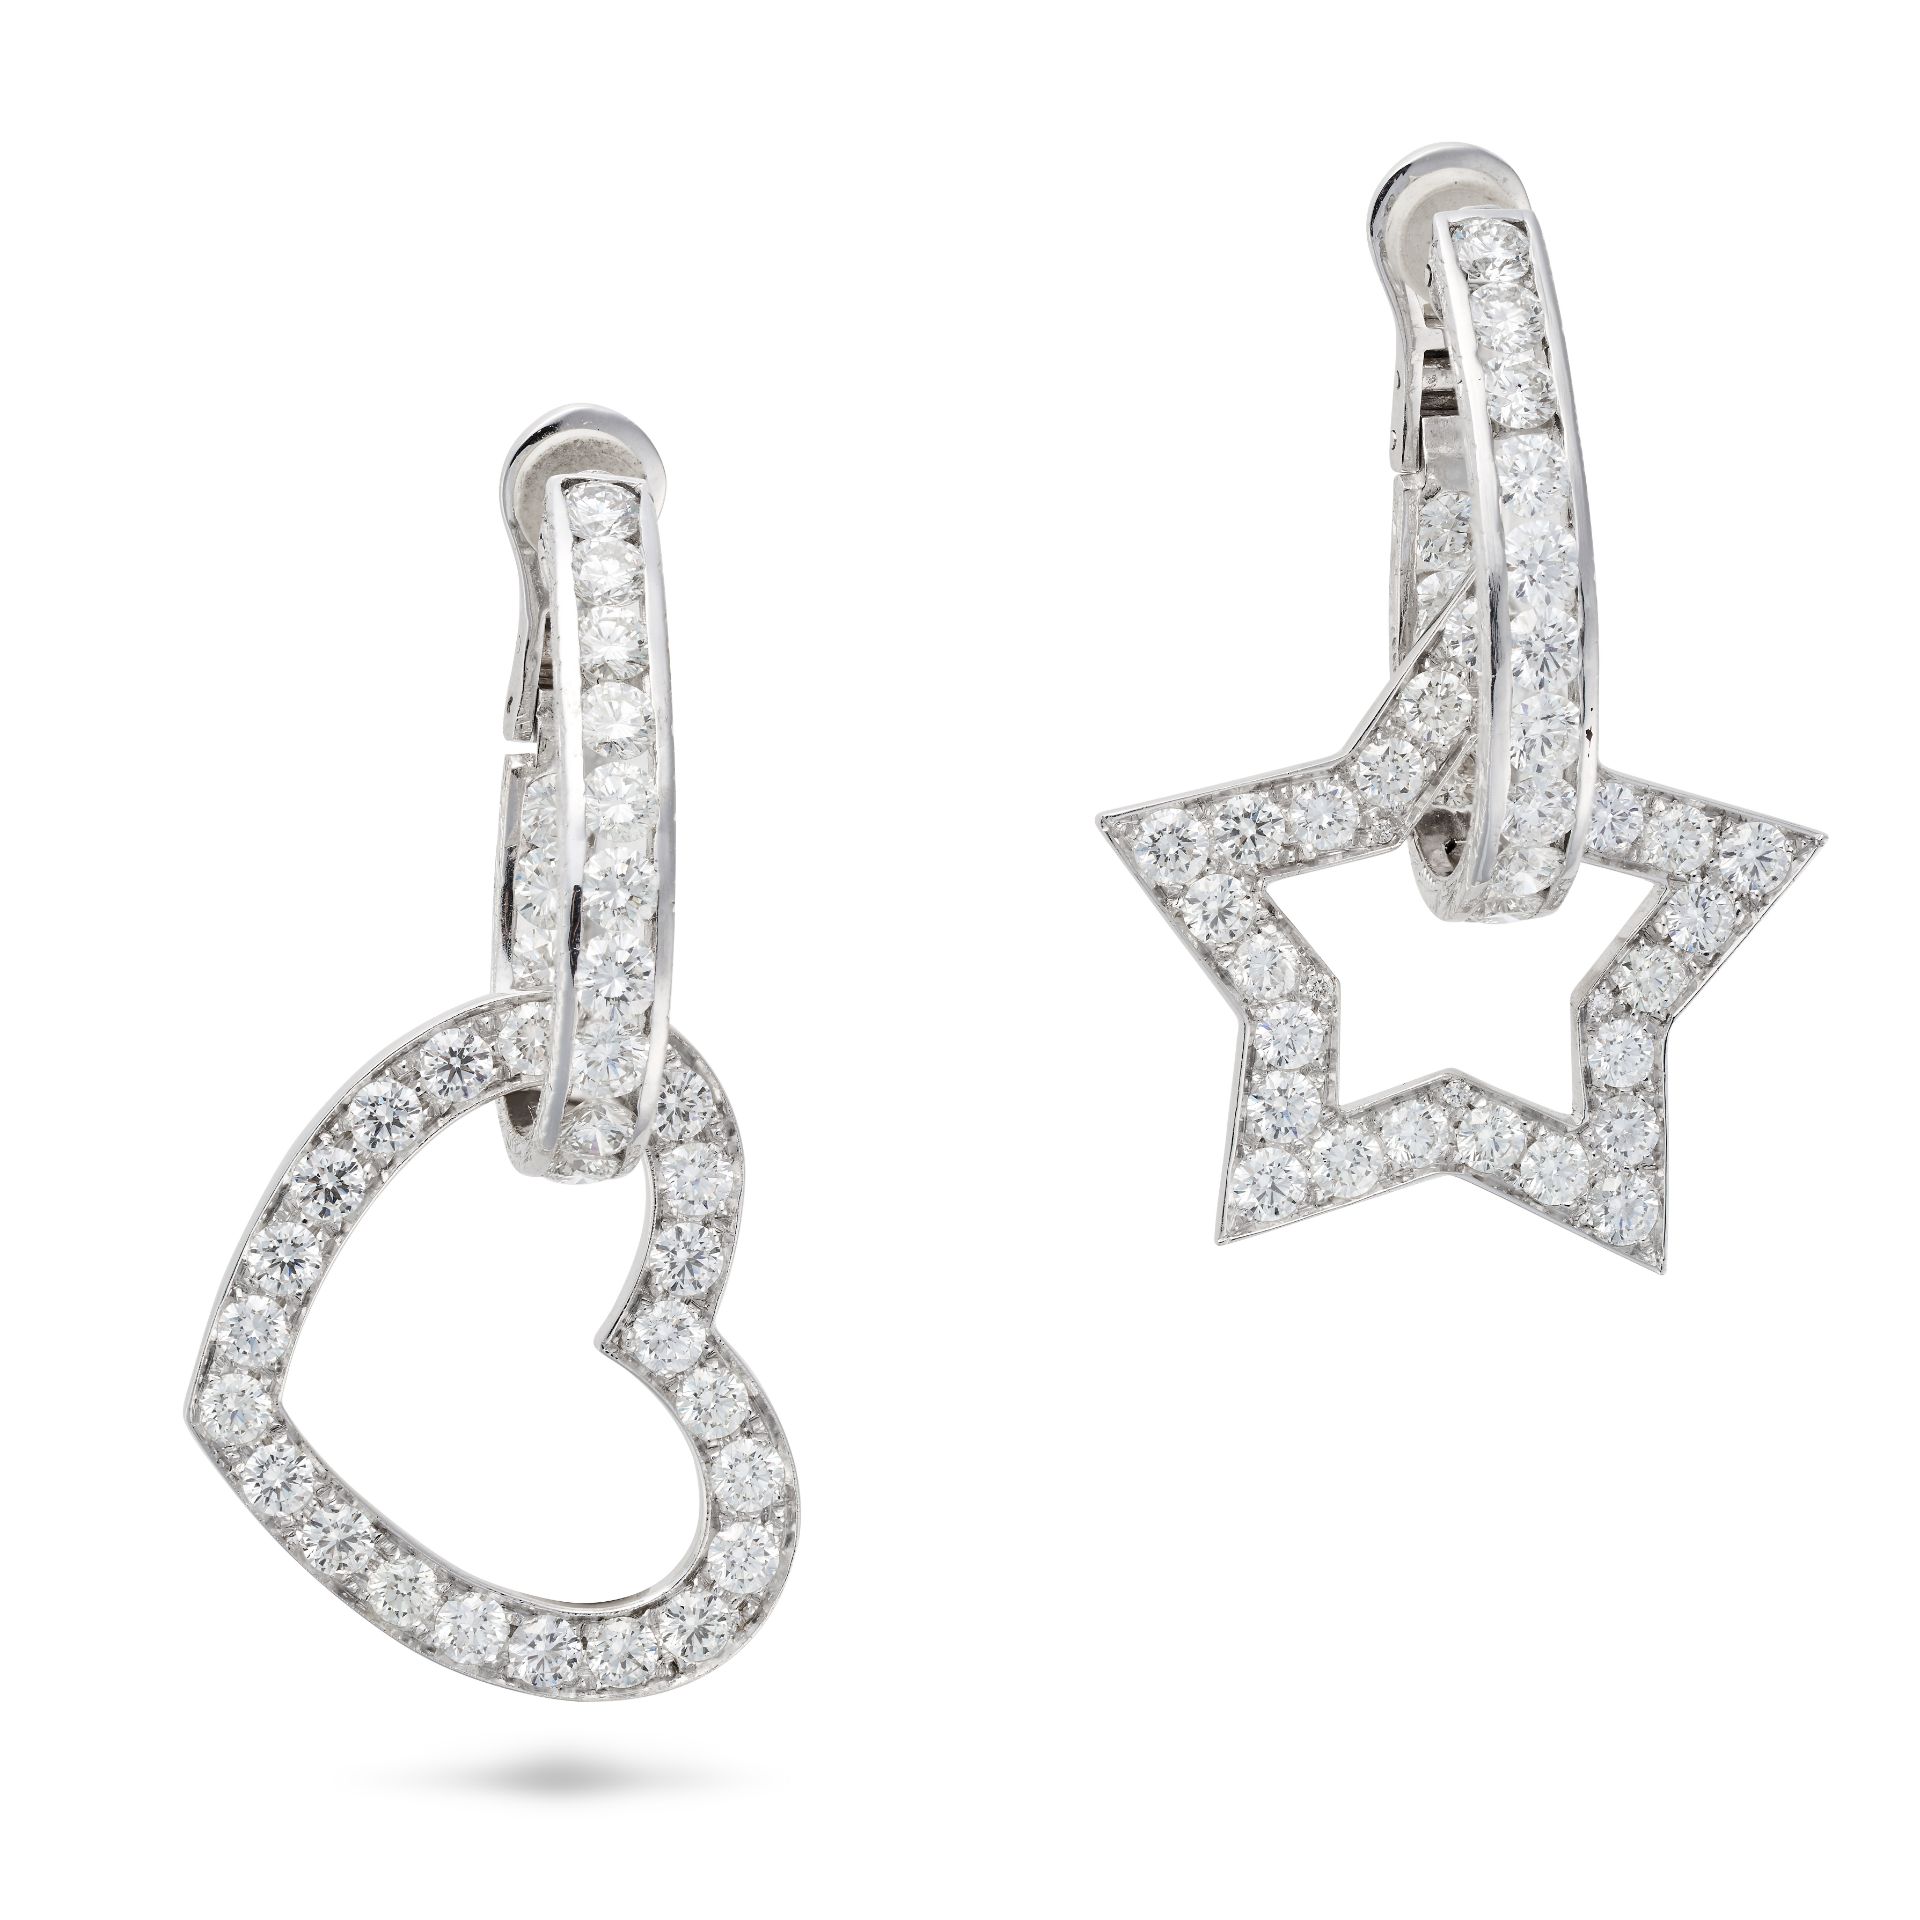 A PAIR OF DIAMOND DROP EARRINGS each comprising a hoop set inside and out with round brilliant cu...